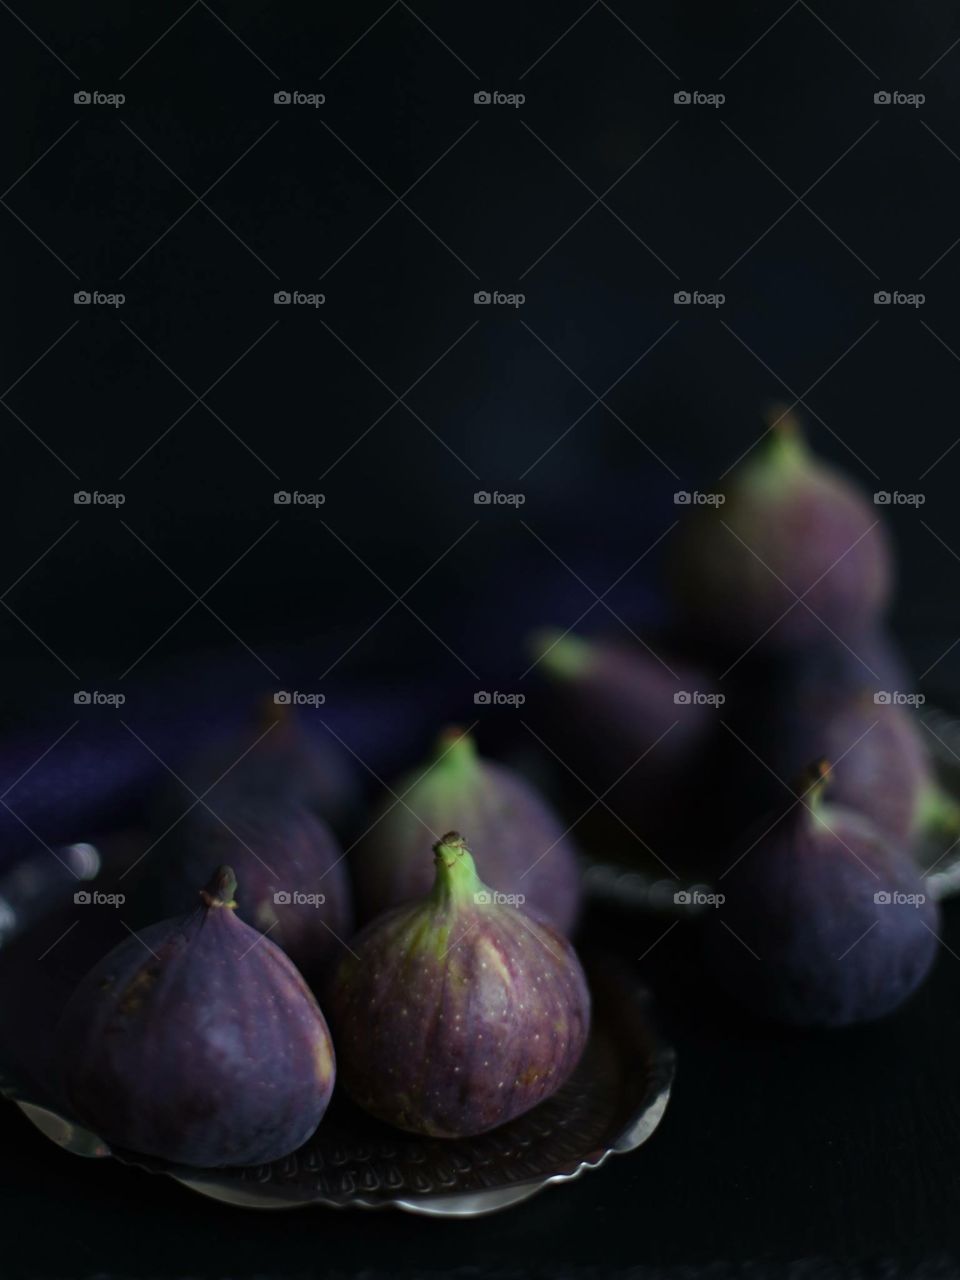 Figs against black background